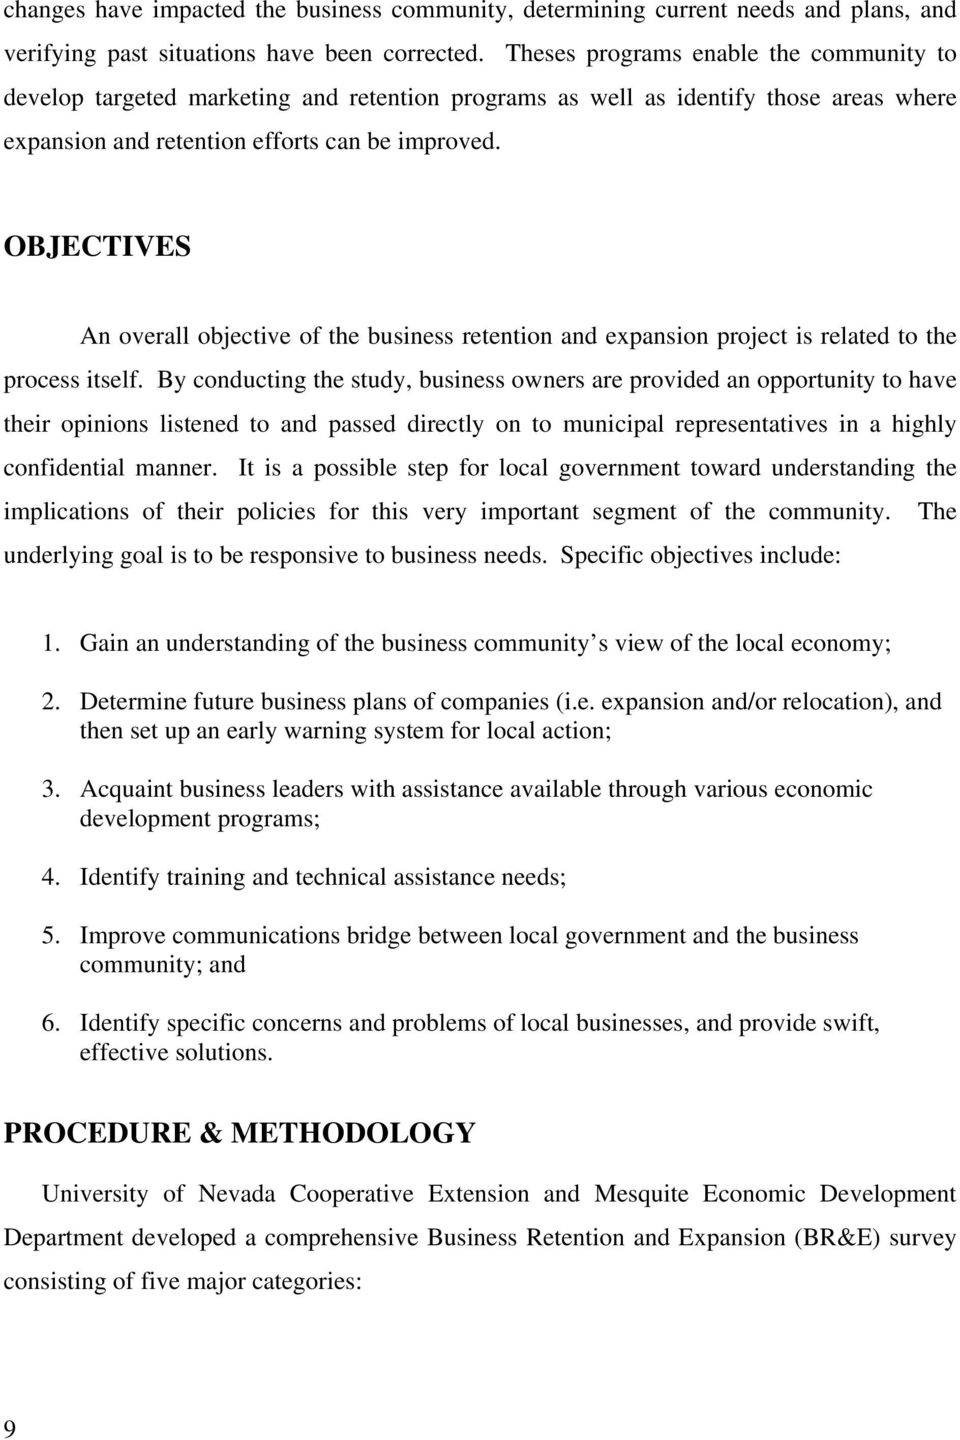 OBJECTIVES An overall objective of the business retention and expansion project is related to the process itself.